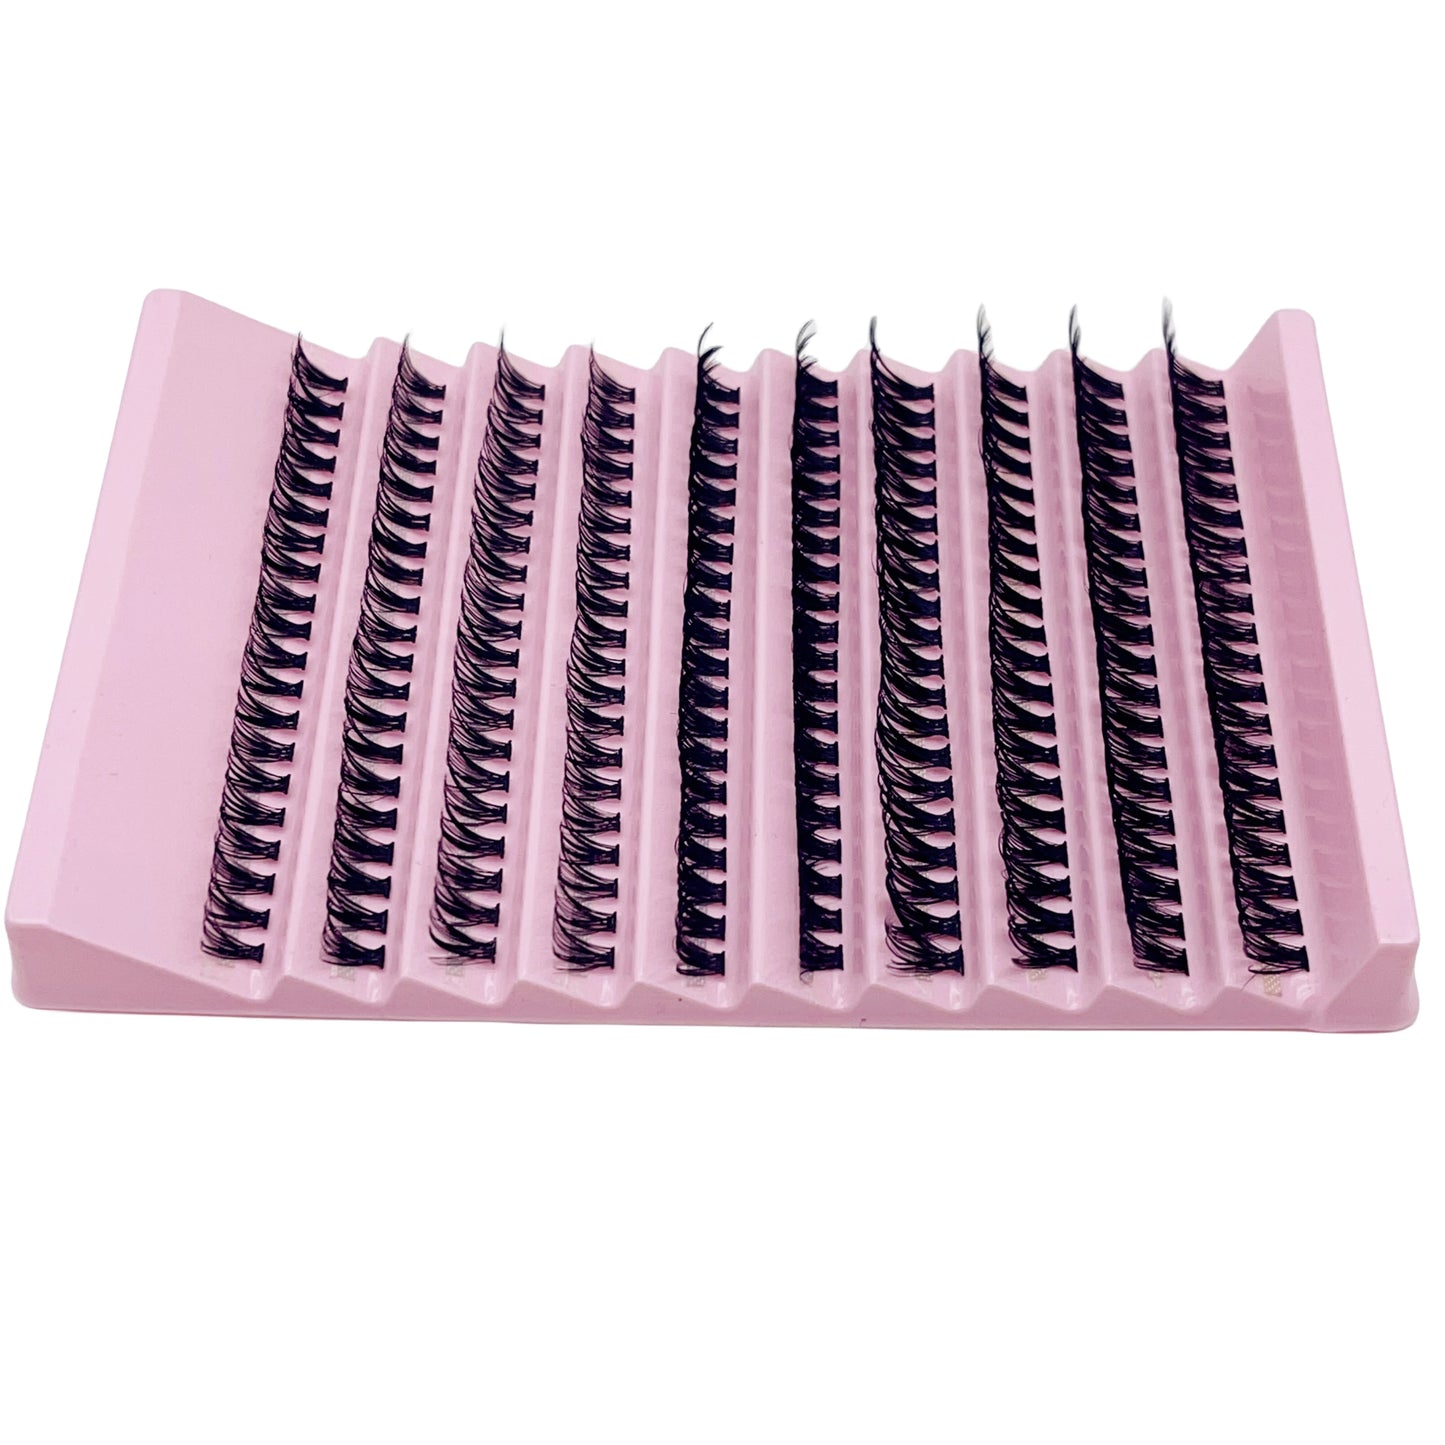 Individual Lashes 8-16mm 200pcs Cluster Lashes